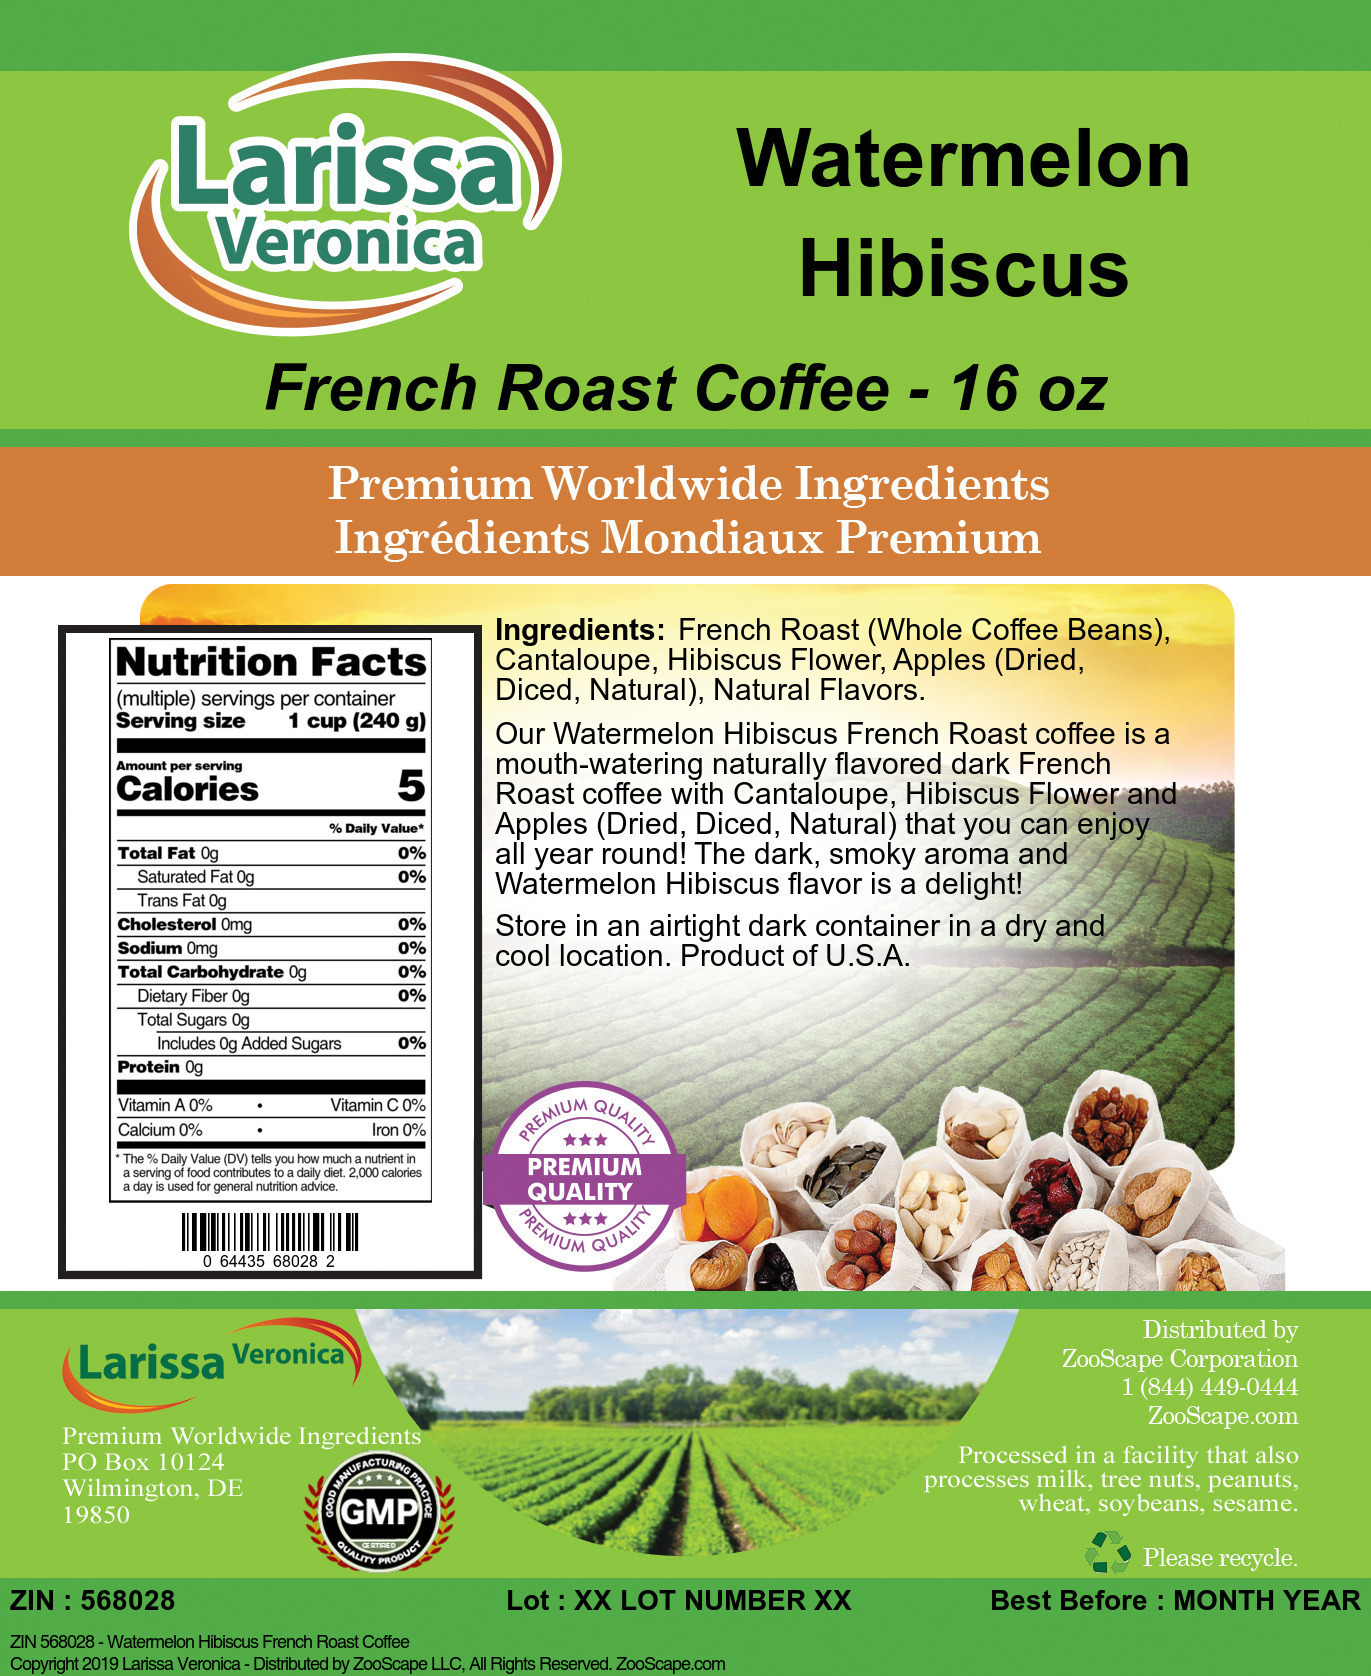 Watermelon Hibiscus French Roast Coffee - Label